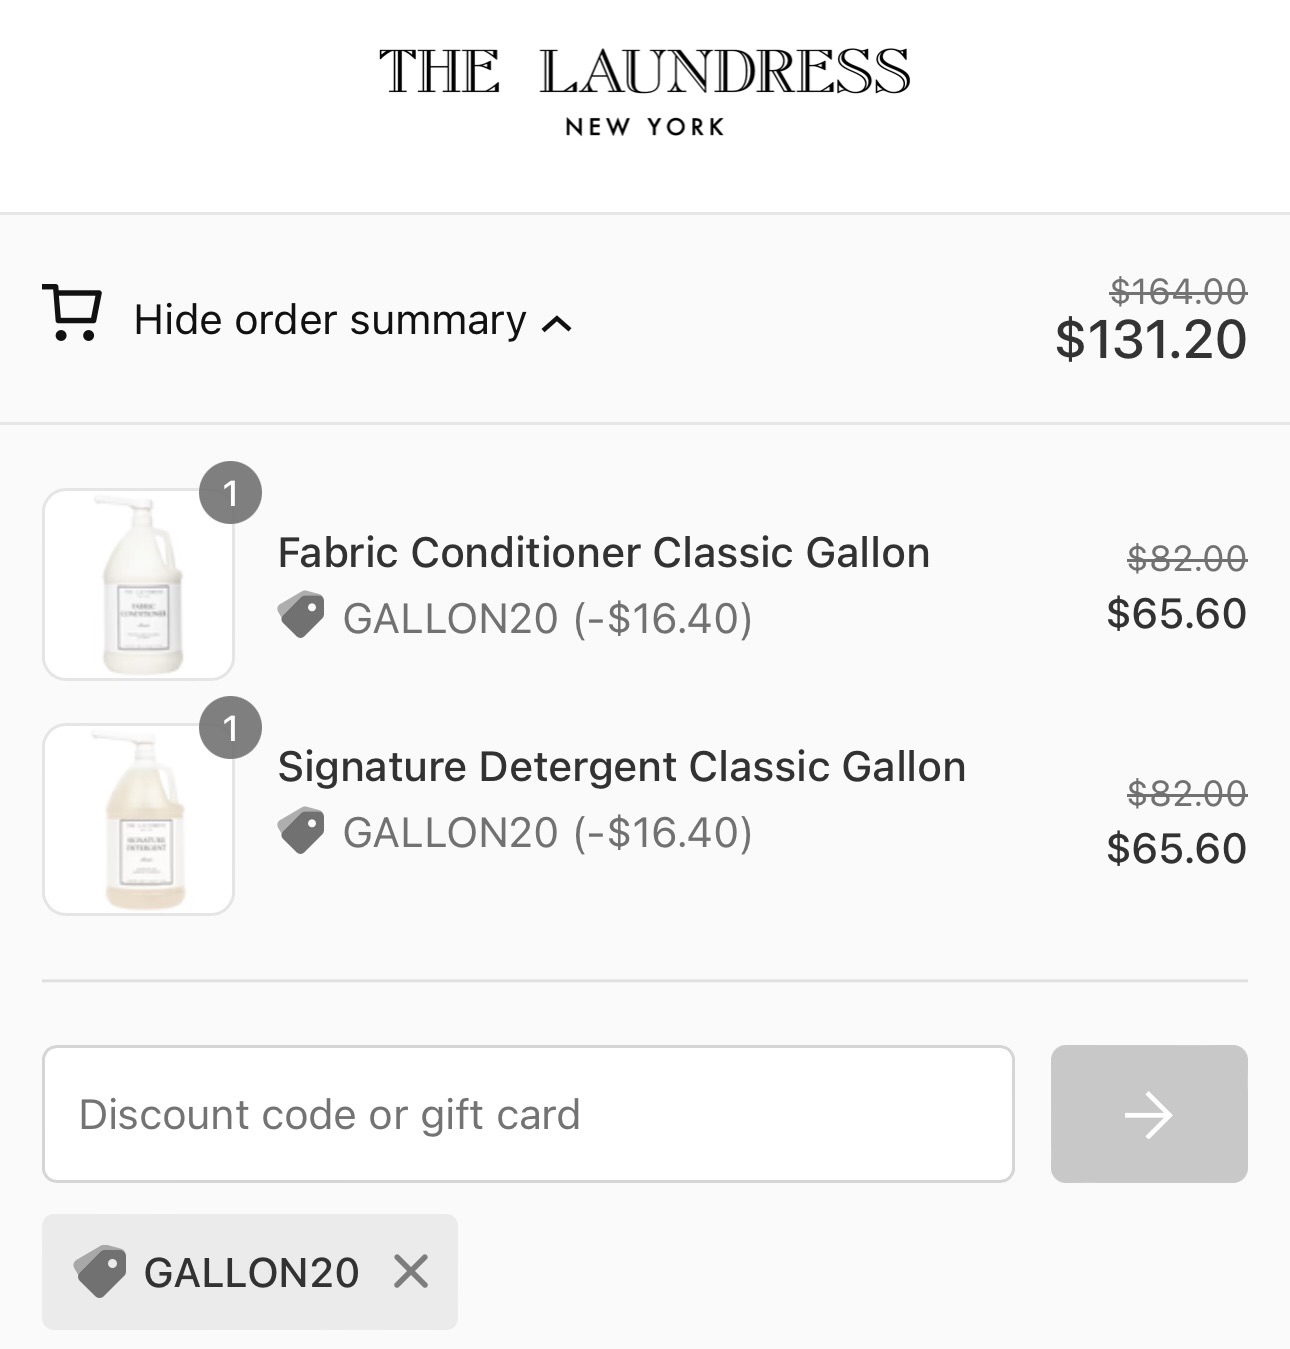 Gallons – The Laundress